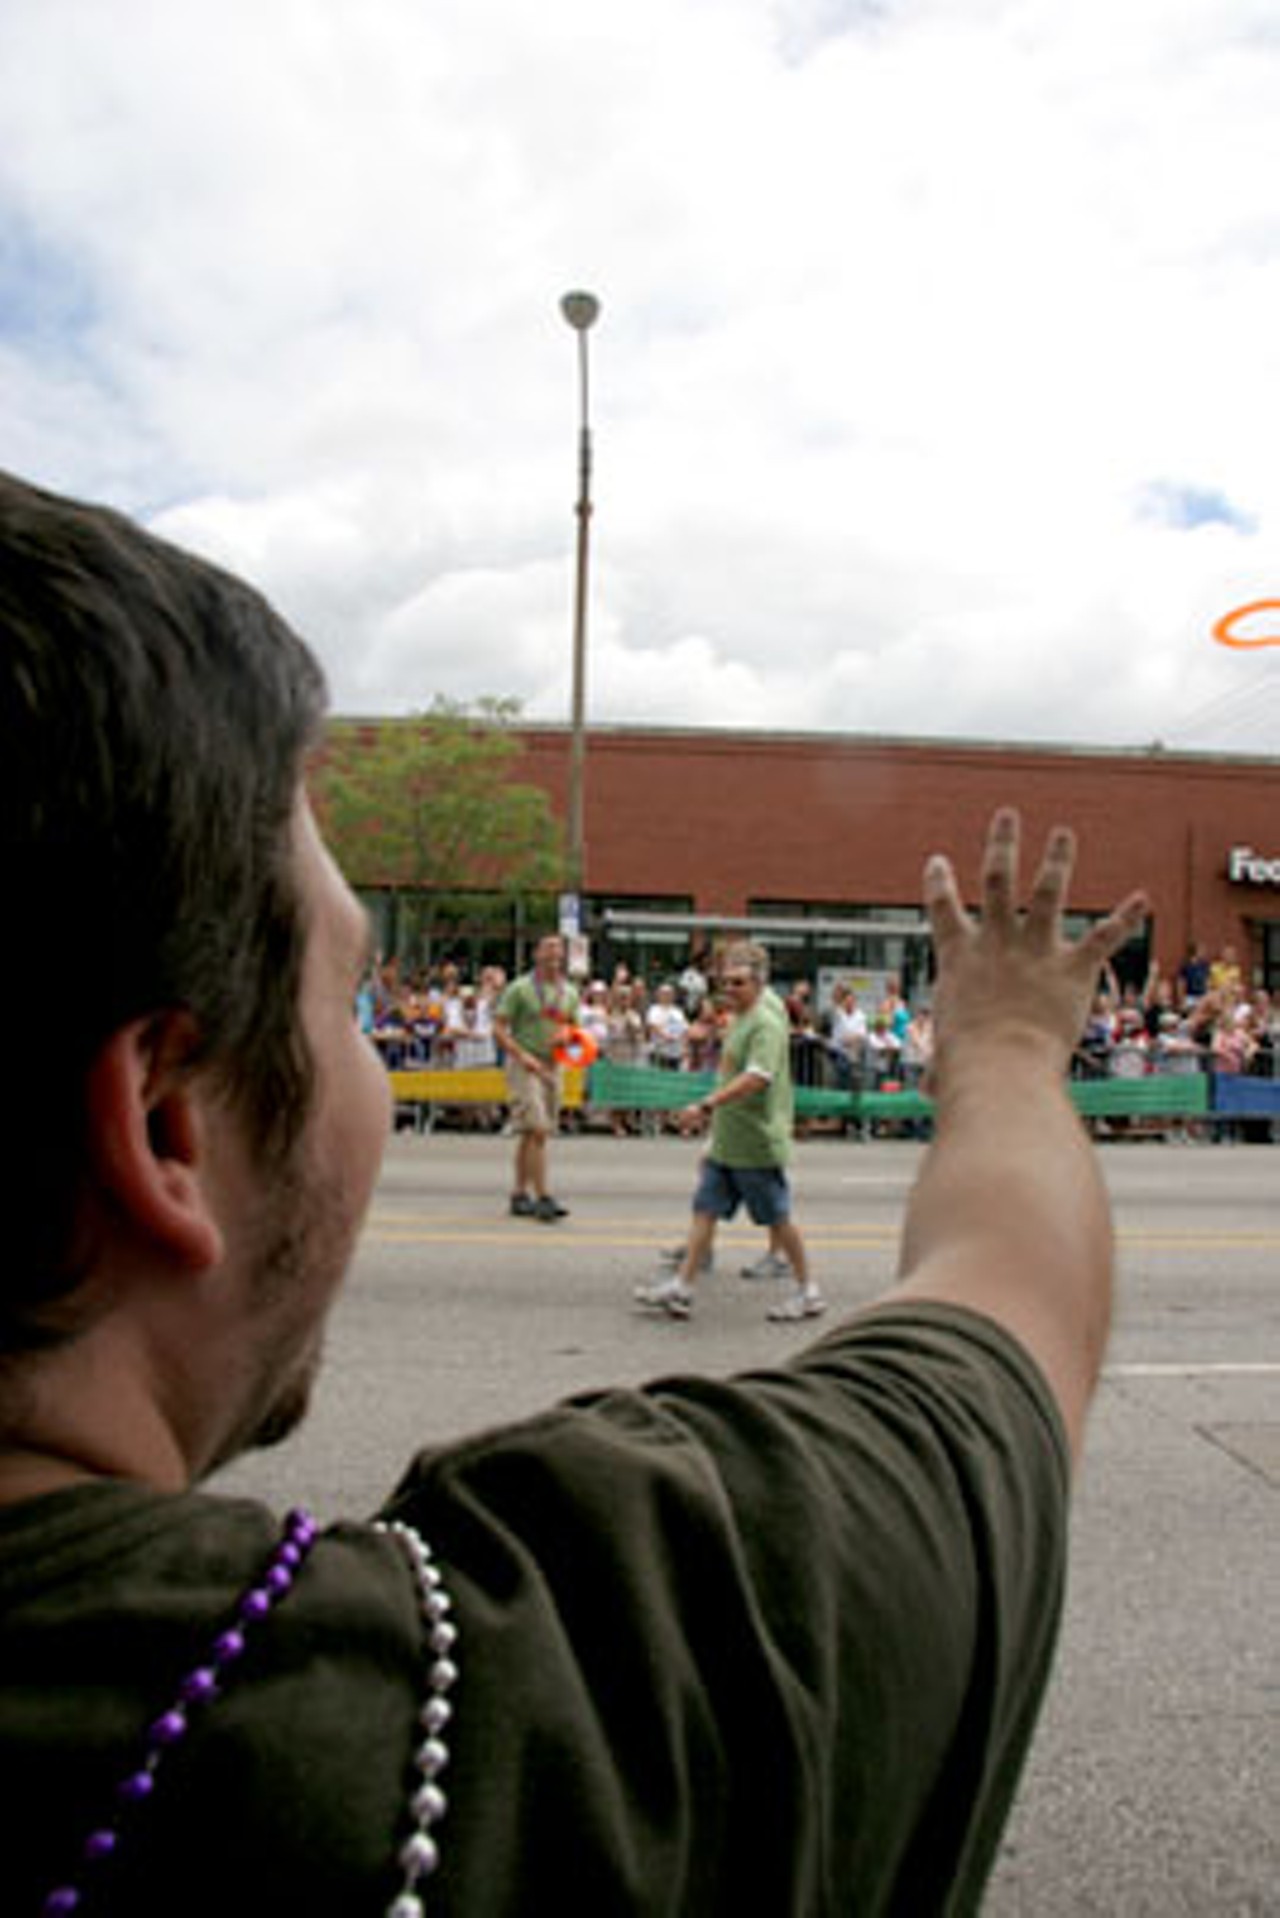 A parade spectator tries to catch a frisbee being thrown into the crowd.